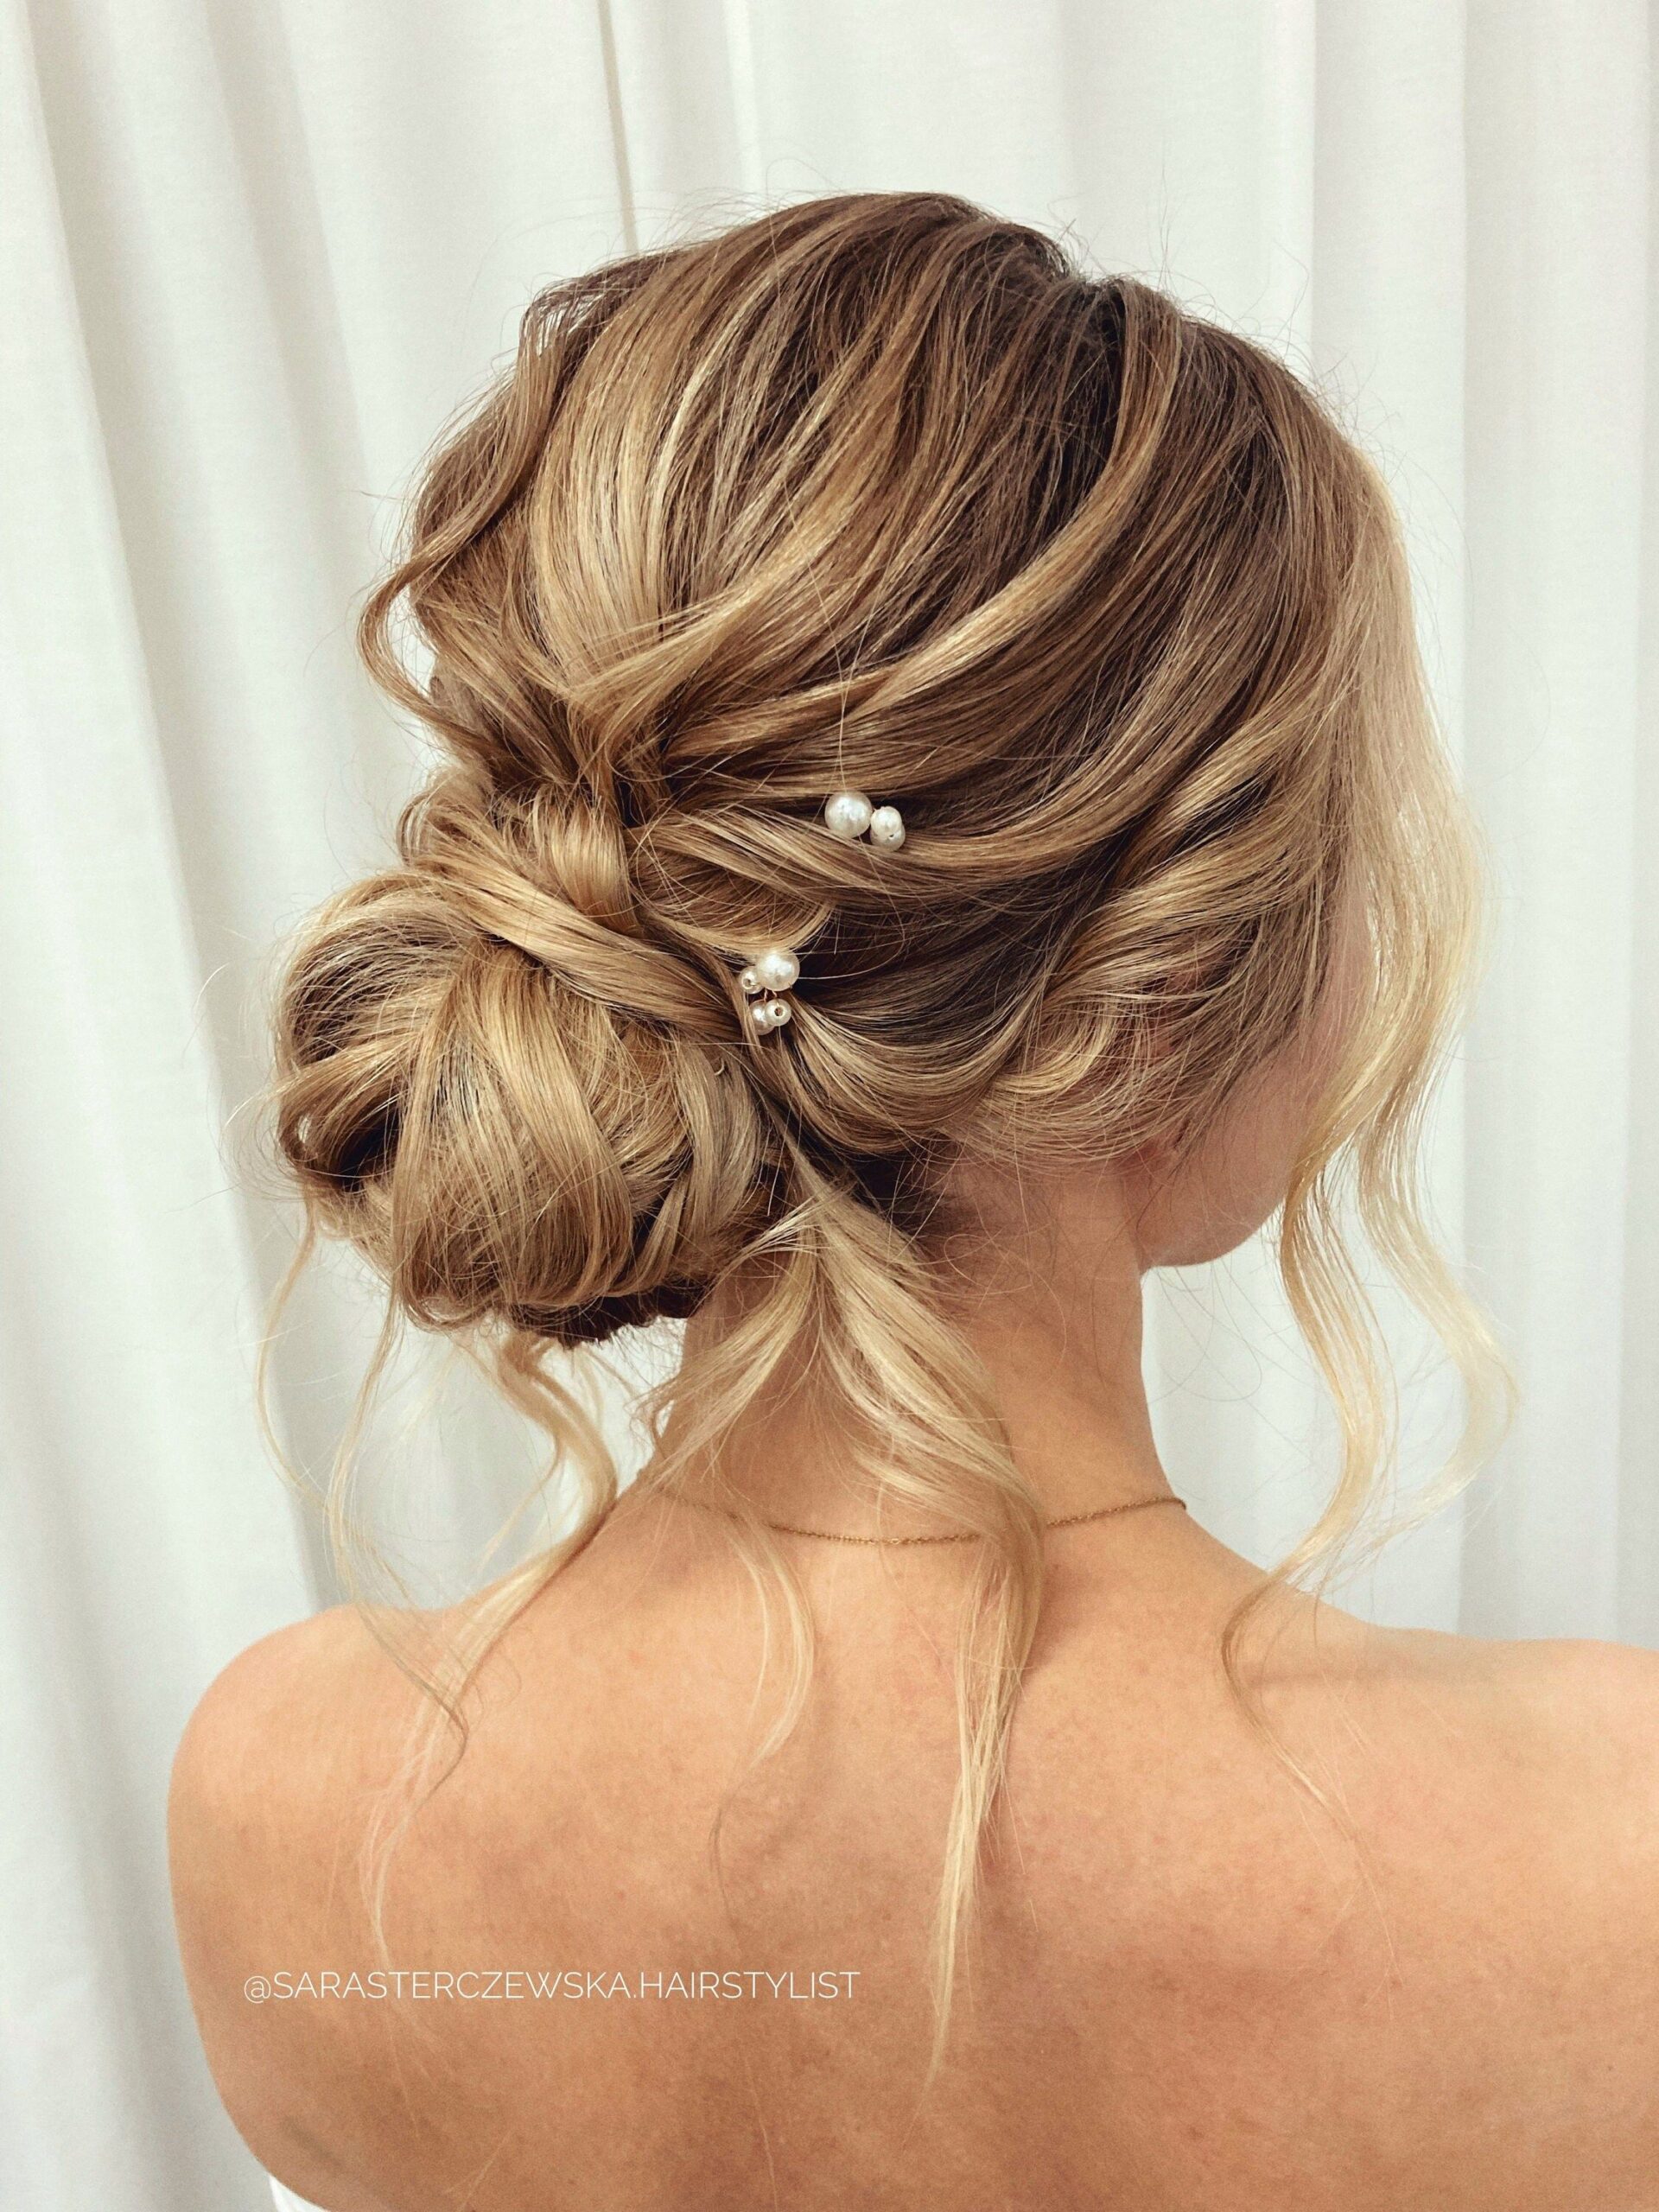 Stunning Bridal Hairstyles for Your Wedding Day